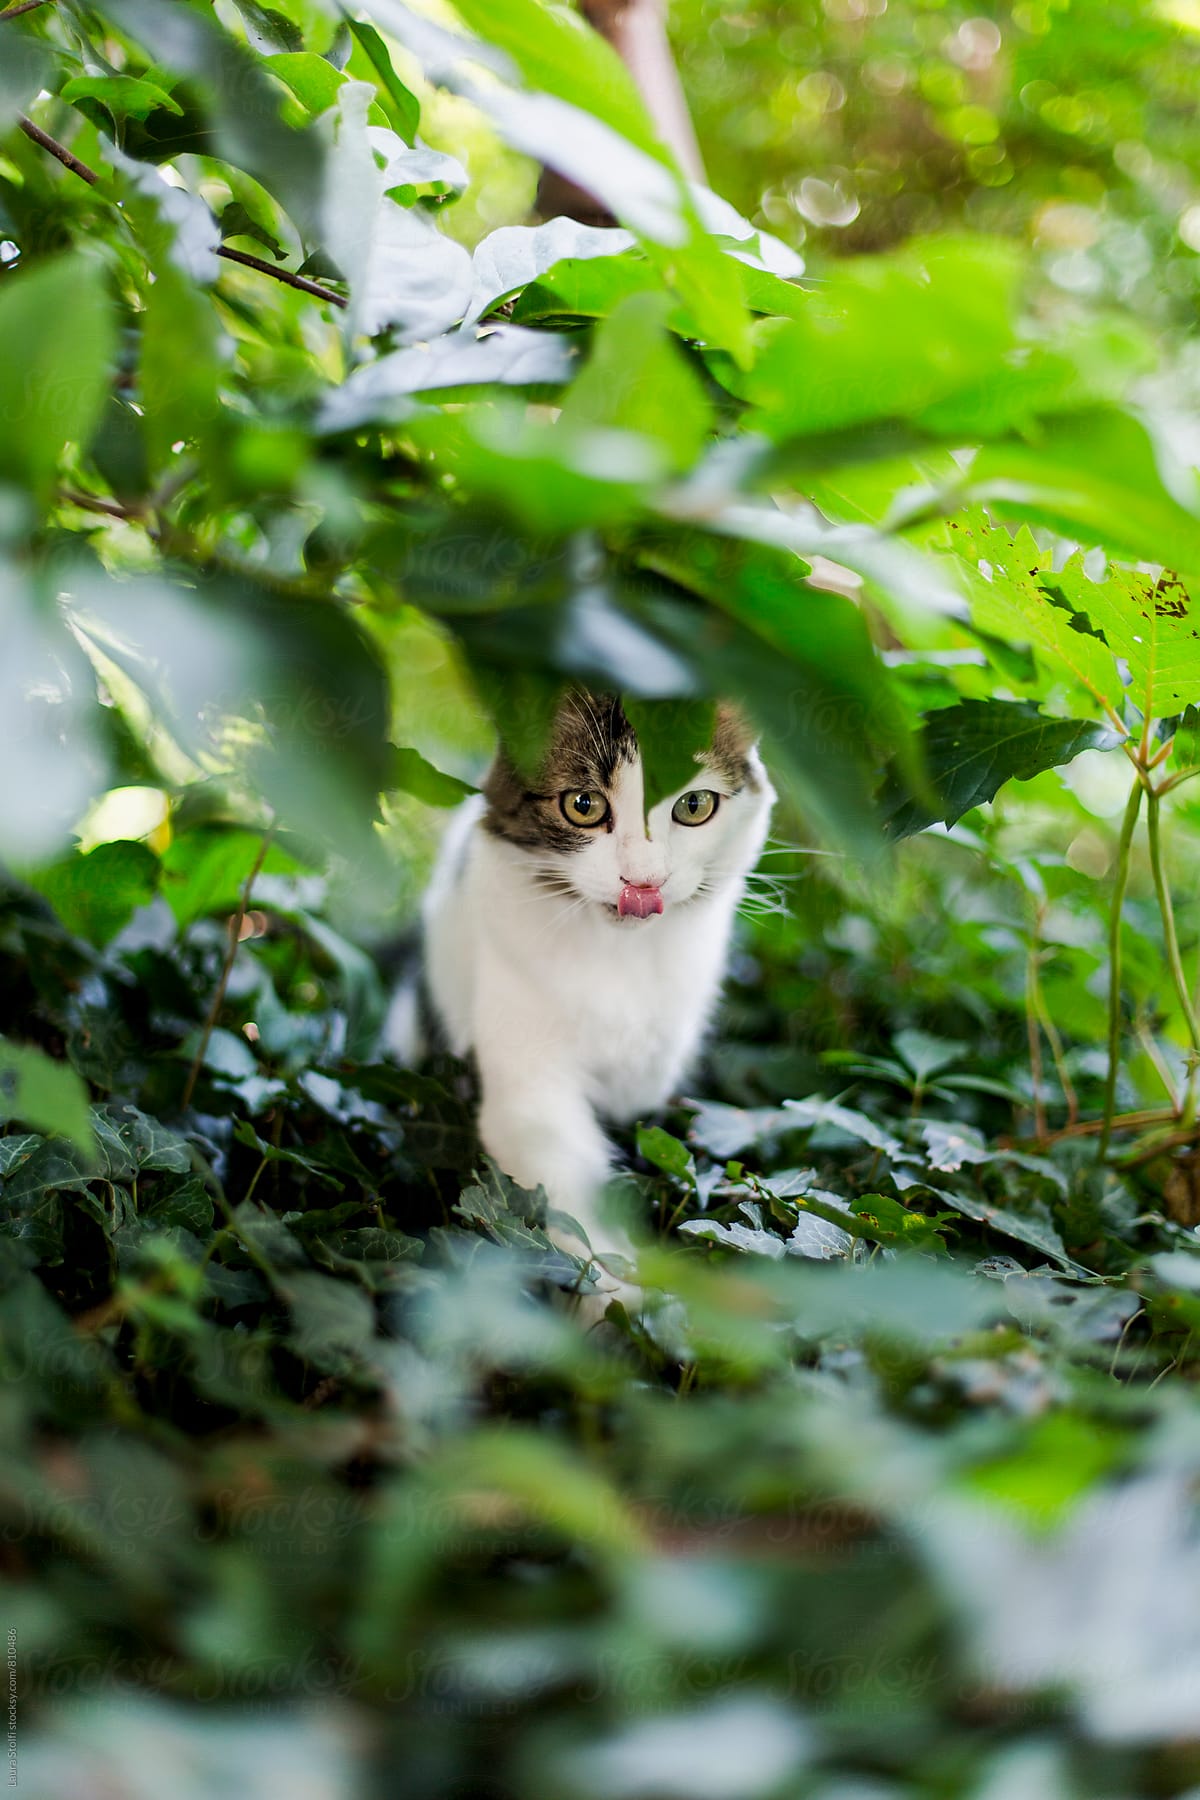 Cat licks her lips while waiting in ambush under plant branches